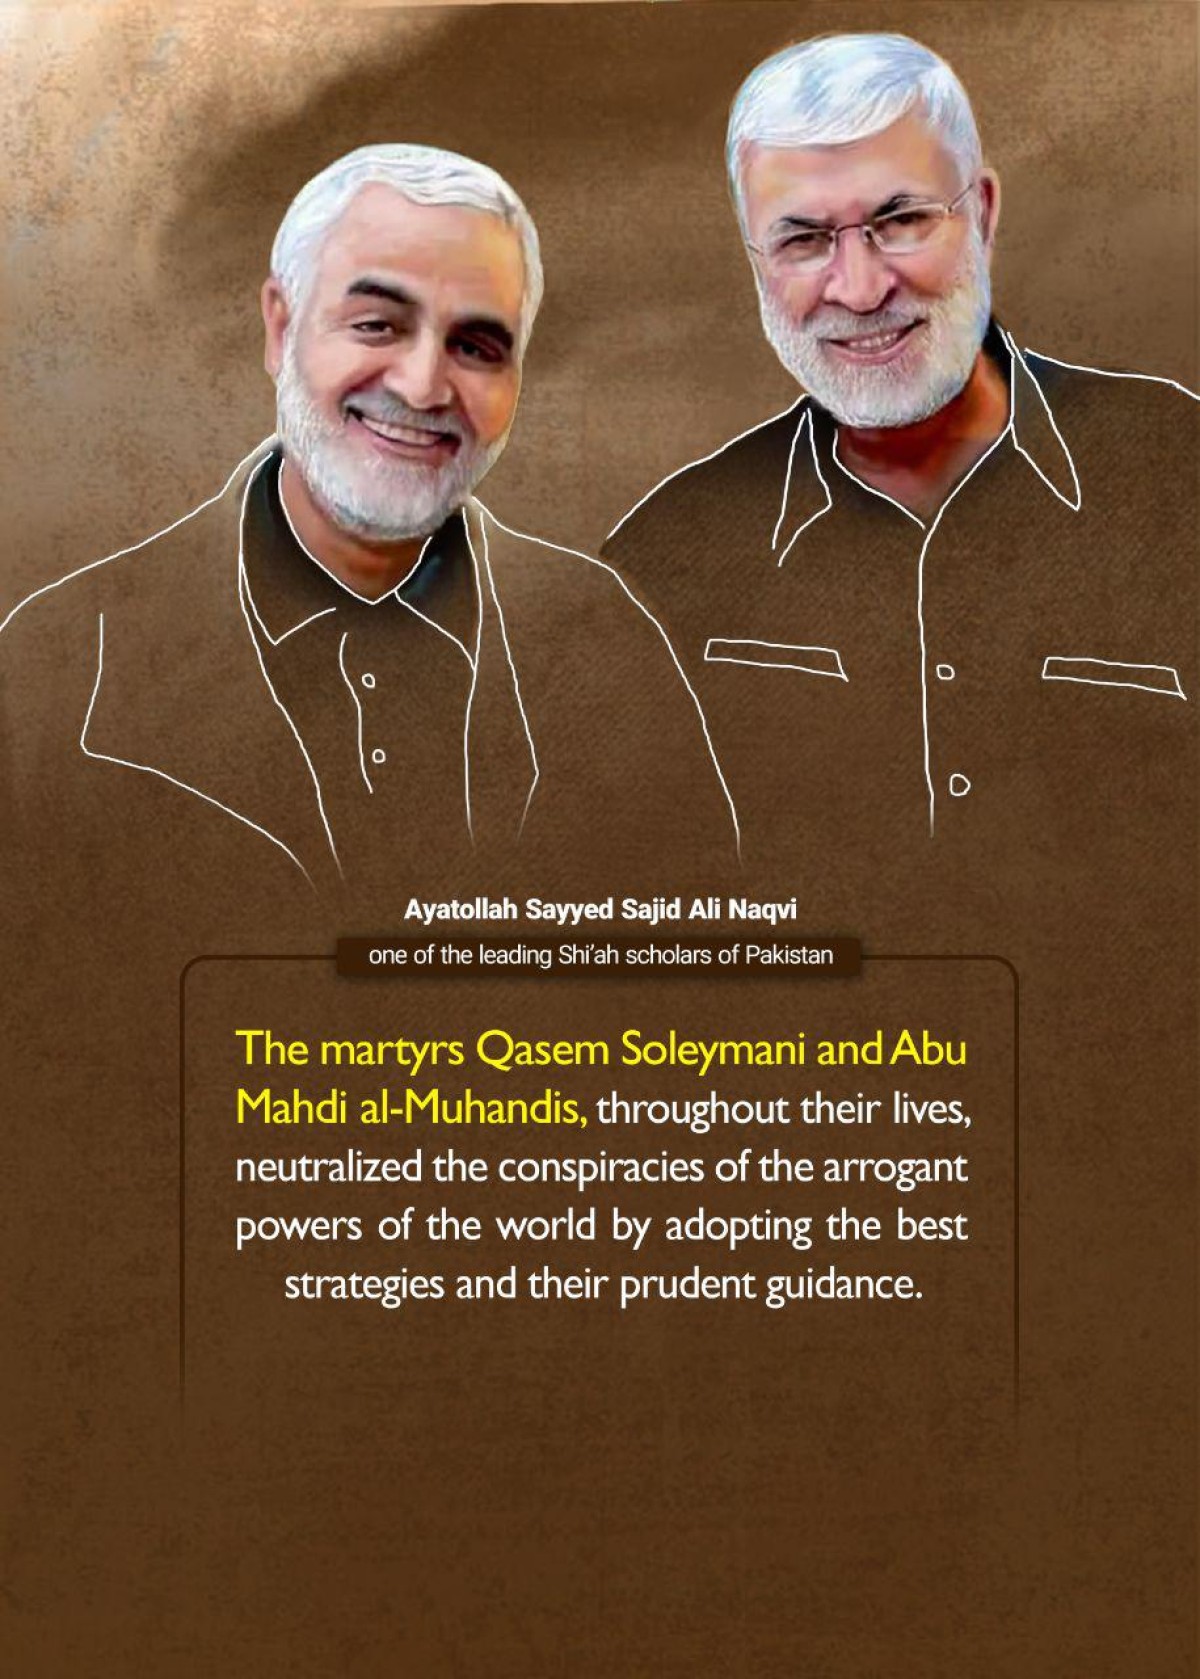 The words of the elders about the martyrs Qasem Soleymani and Abu Mahdi al-Mohandes 6